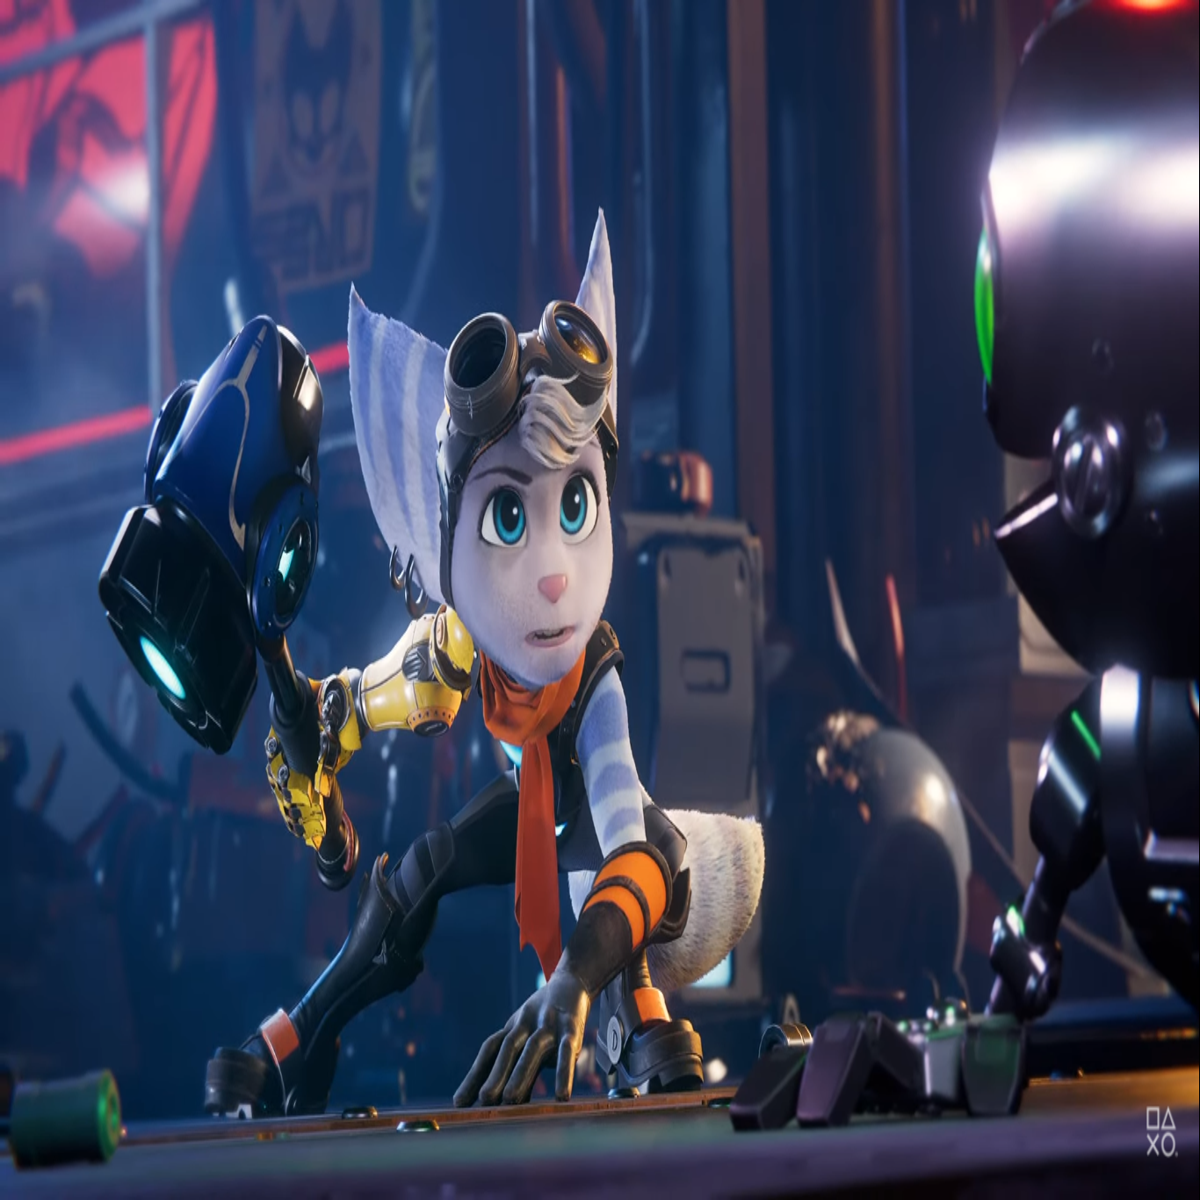 Ratchet & Clank 5: Rift Apart Reveals New Trailer and PS5 Release Date